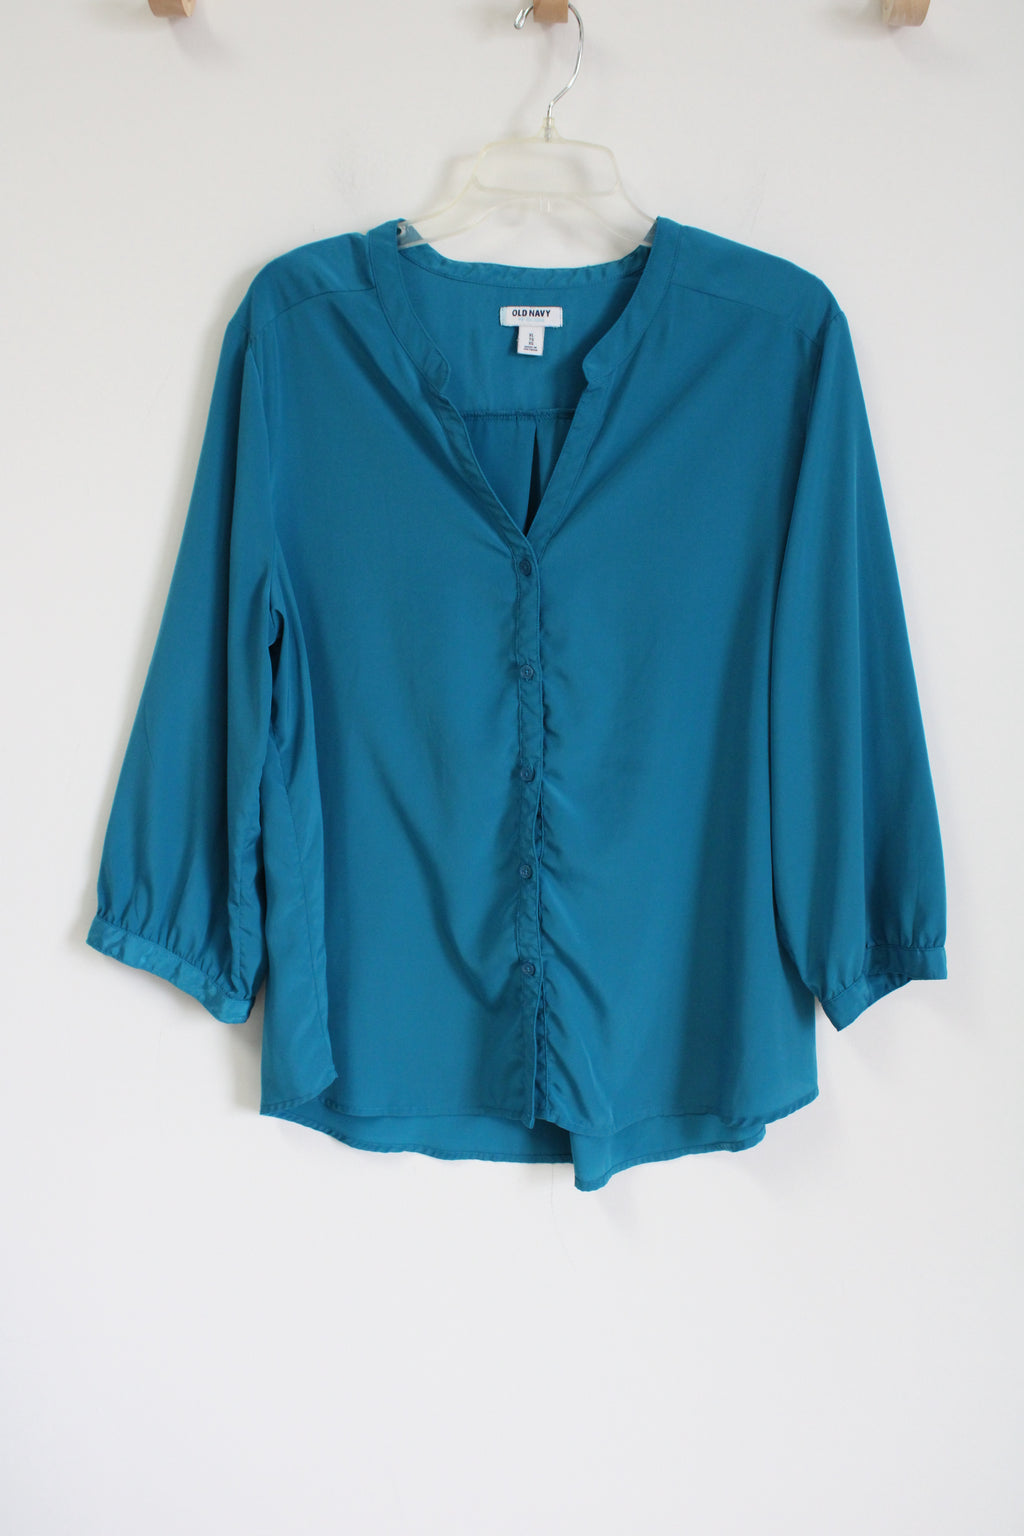 Old Navy Teal Blue Blouse | XL